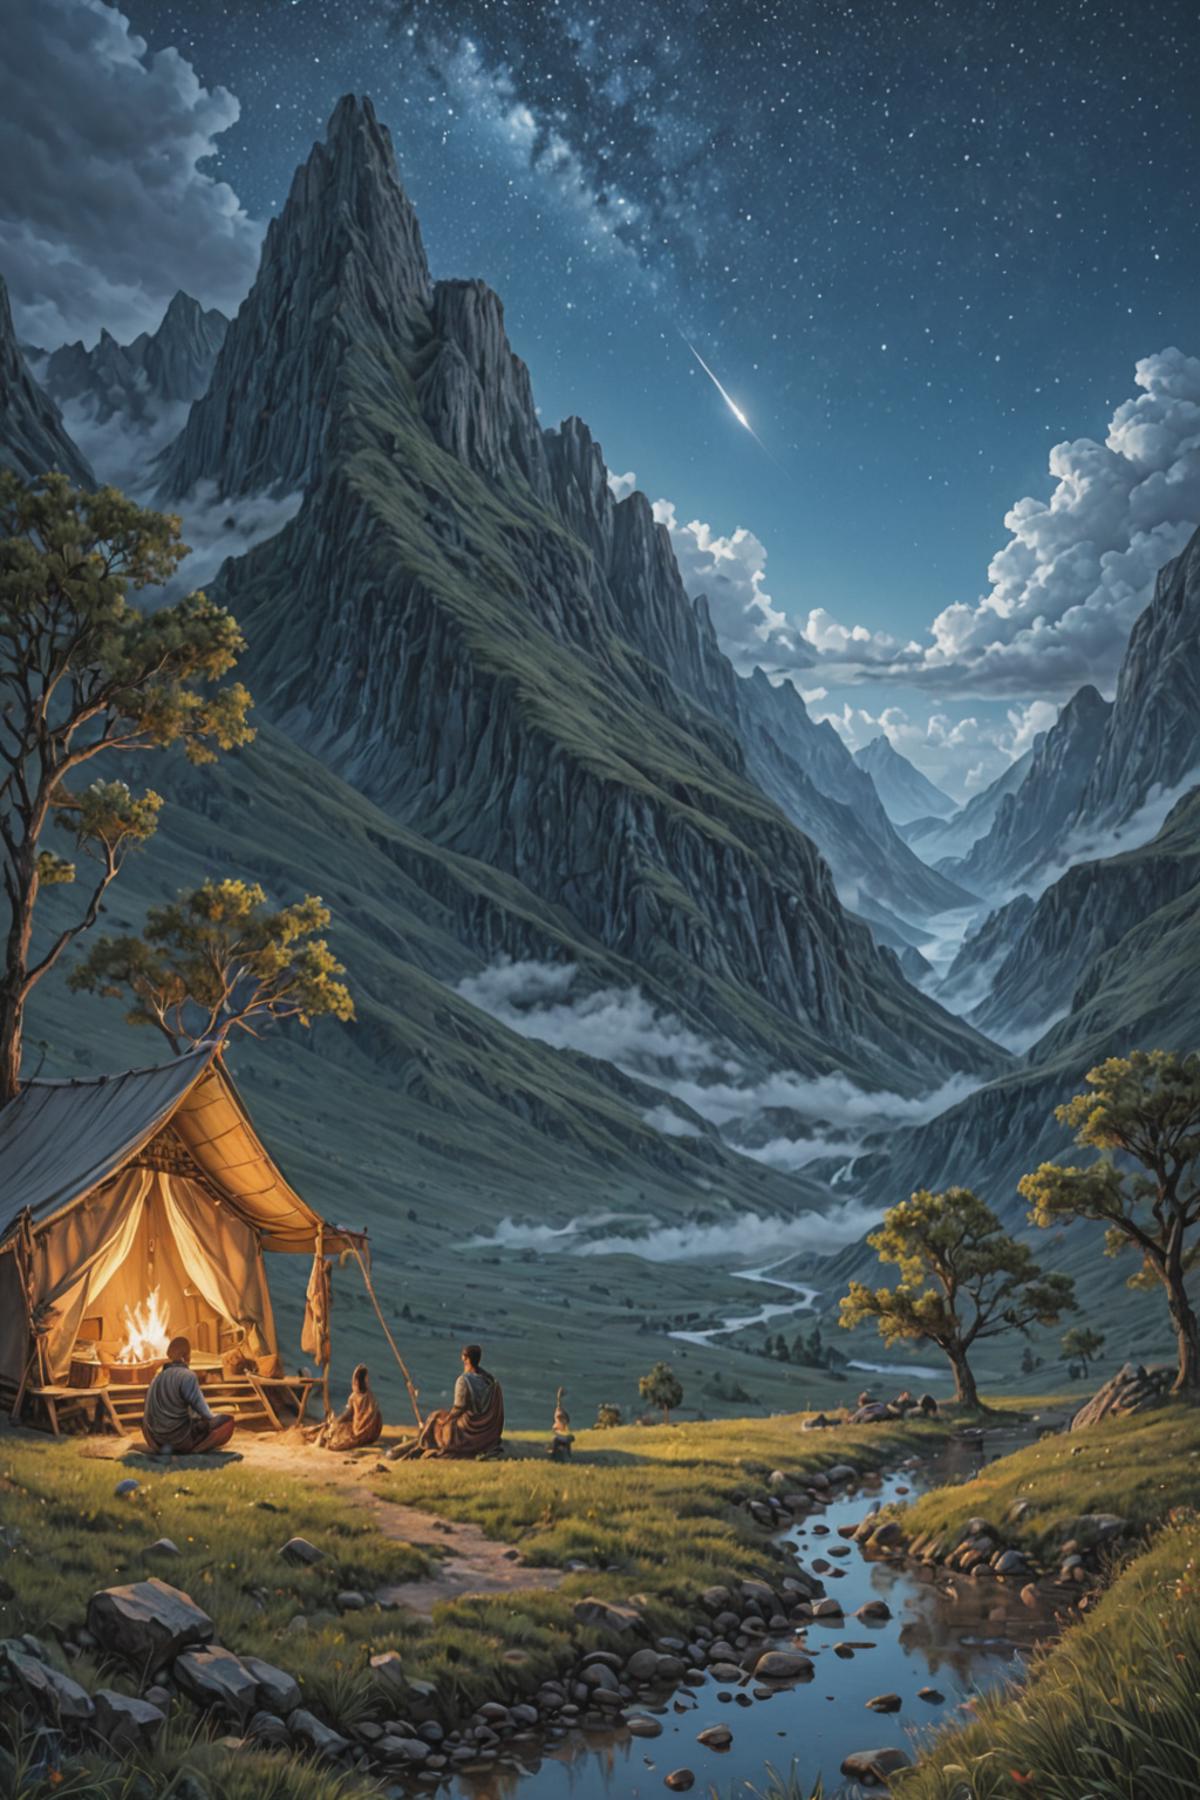 A painting of a group of people in a camping tent surrounded by a mountain landscape.